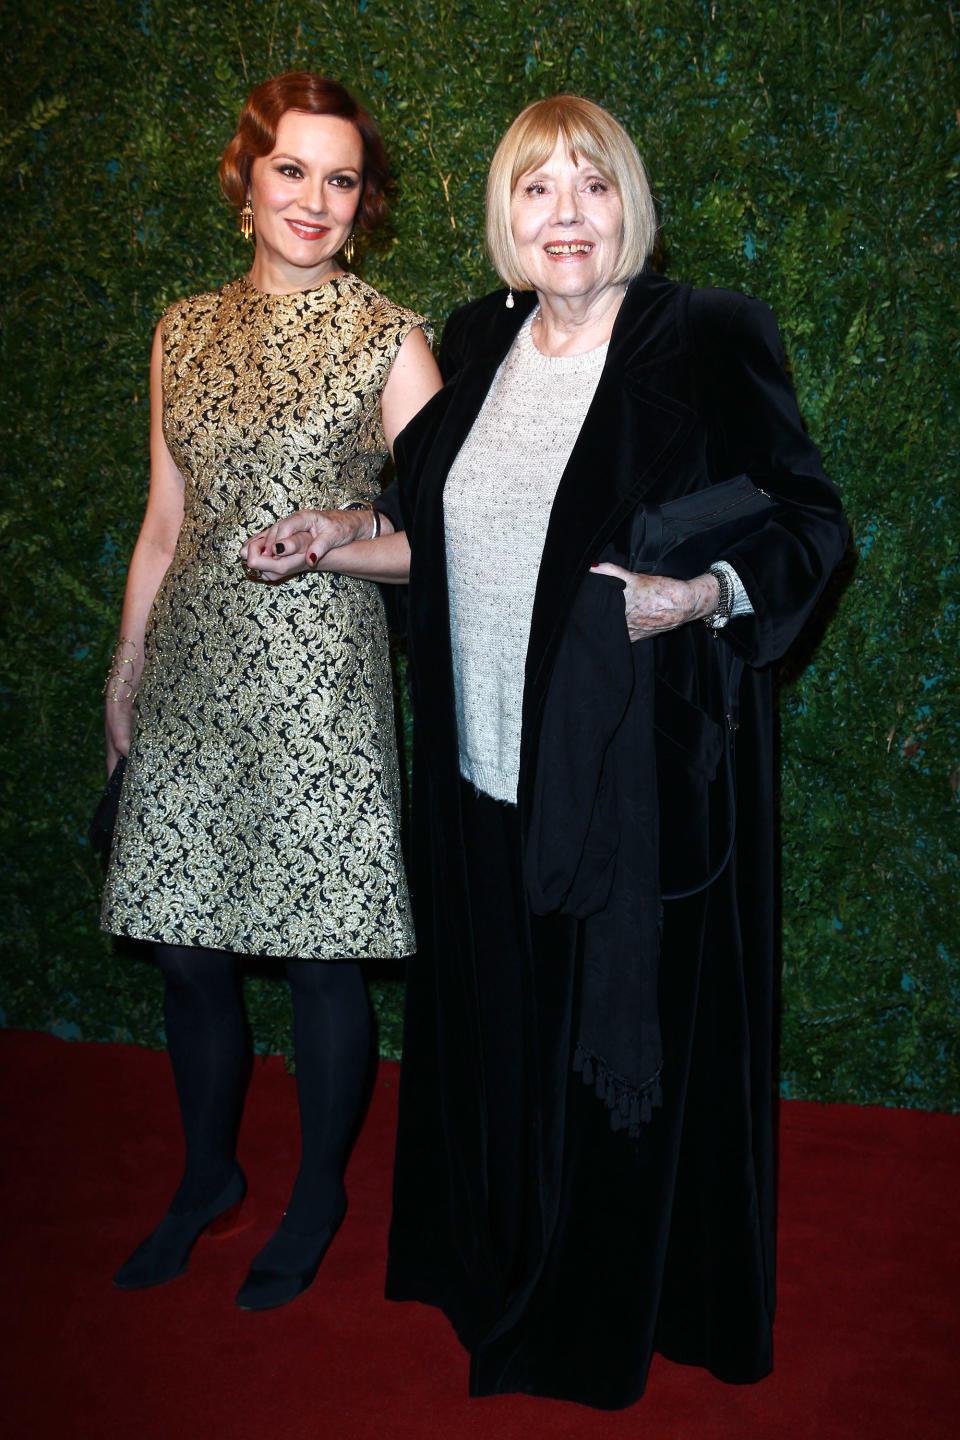 LONDON, UNITED KINGDOM - NOVEMBER 30: Rachel Stirling and Diana Rigg attends the 60th London Evening Standard Theatre Awards at London Palladium on November 30, 2014 in London, England. (Photo by Fred Duval/FilmMagic)